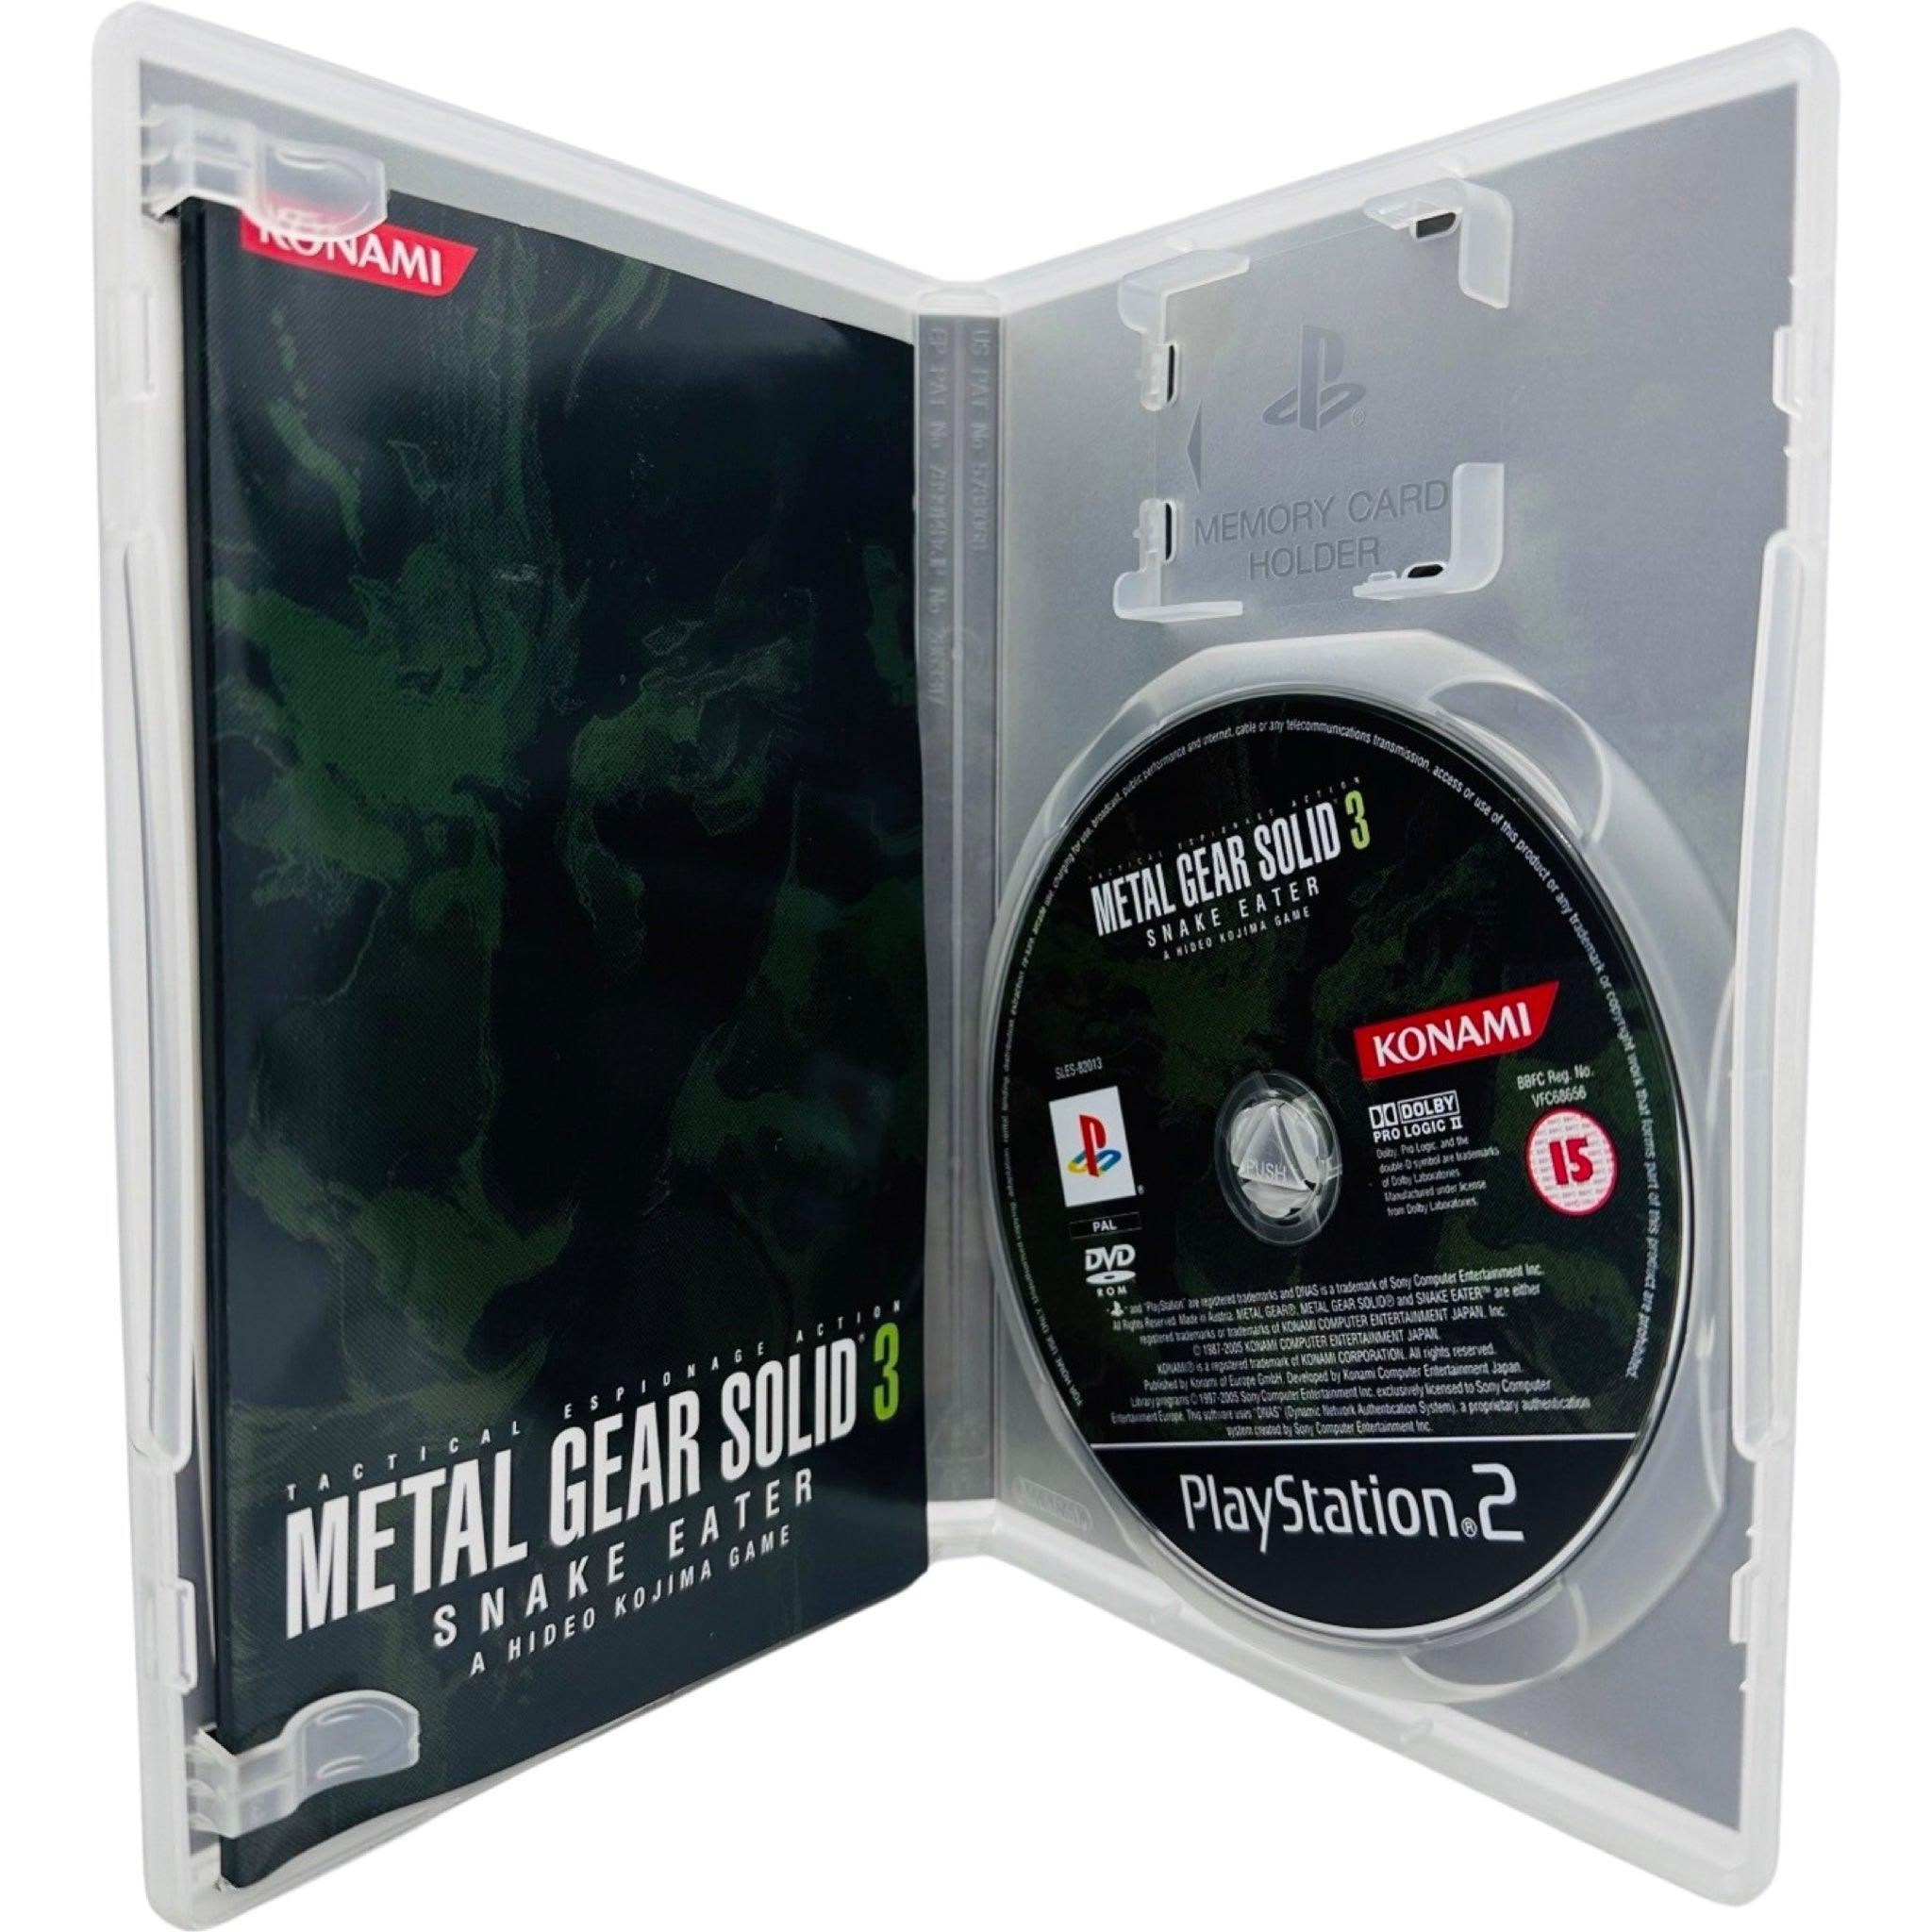 PS2: Metal Gear Solid 3 Snake Eater - RetroGaming.no